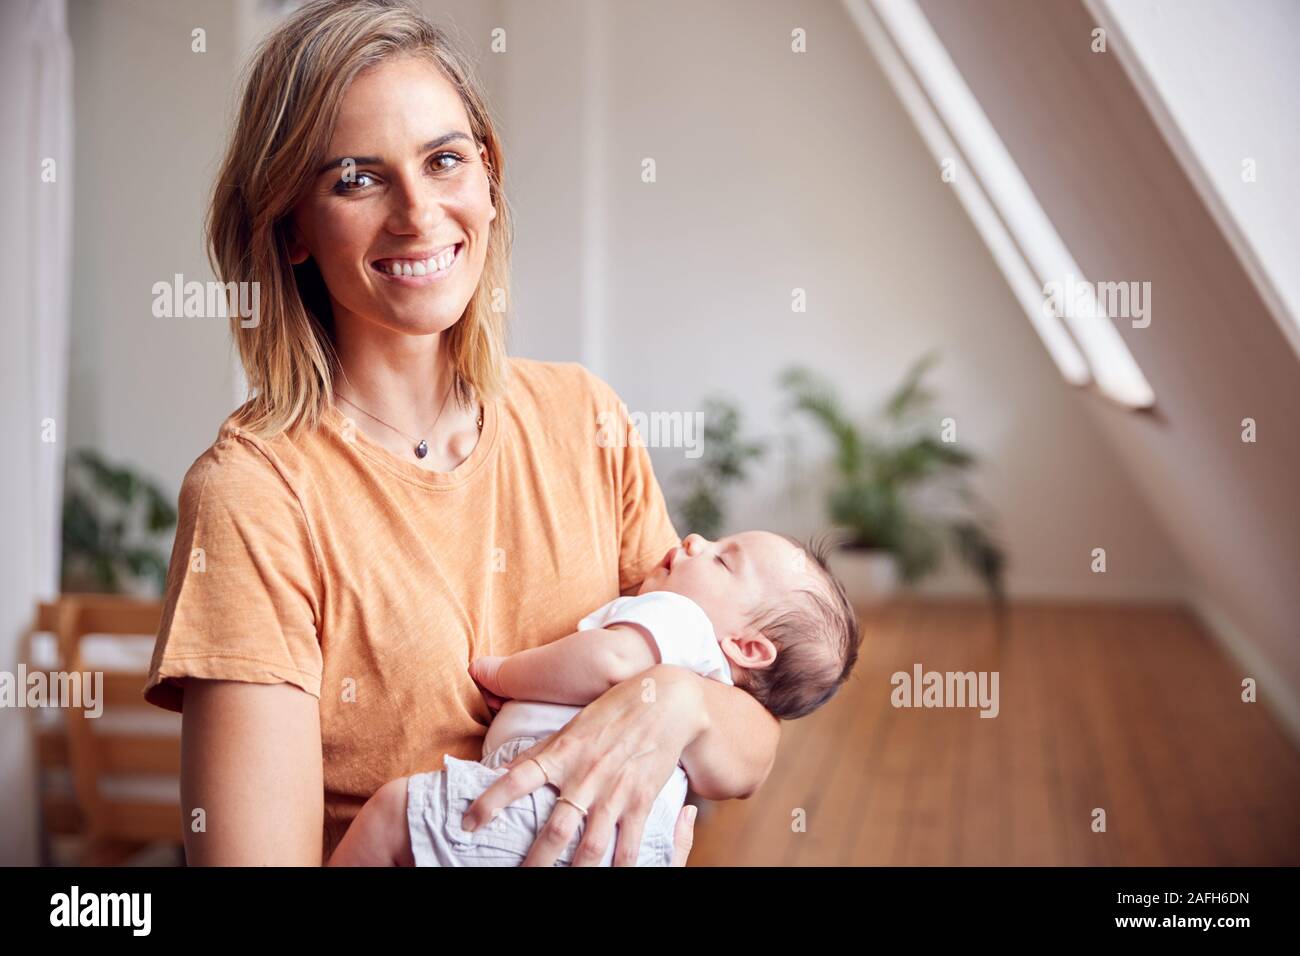 Portrait Of Loving Mother Holding Newborn Baby At Home In Loft Apartment Stock Photo